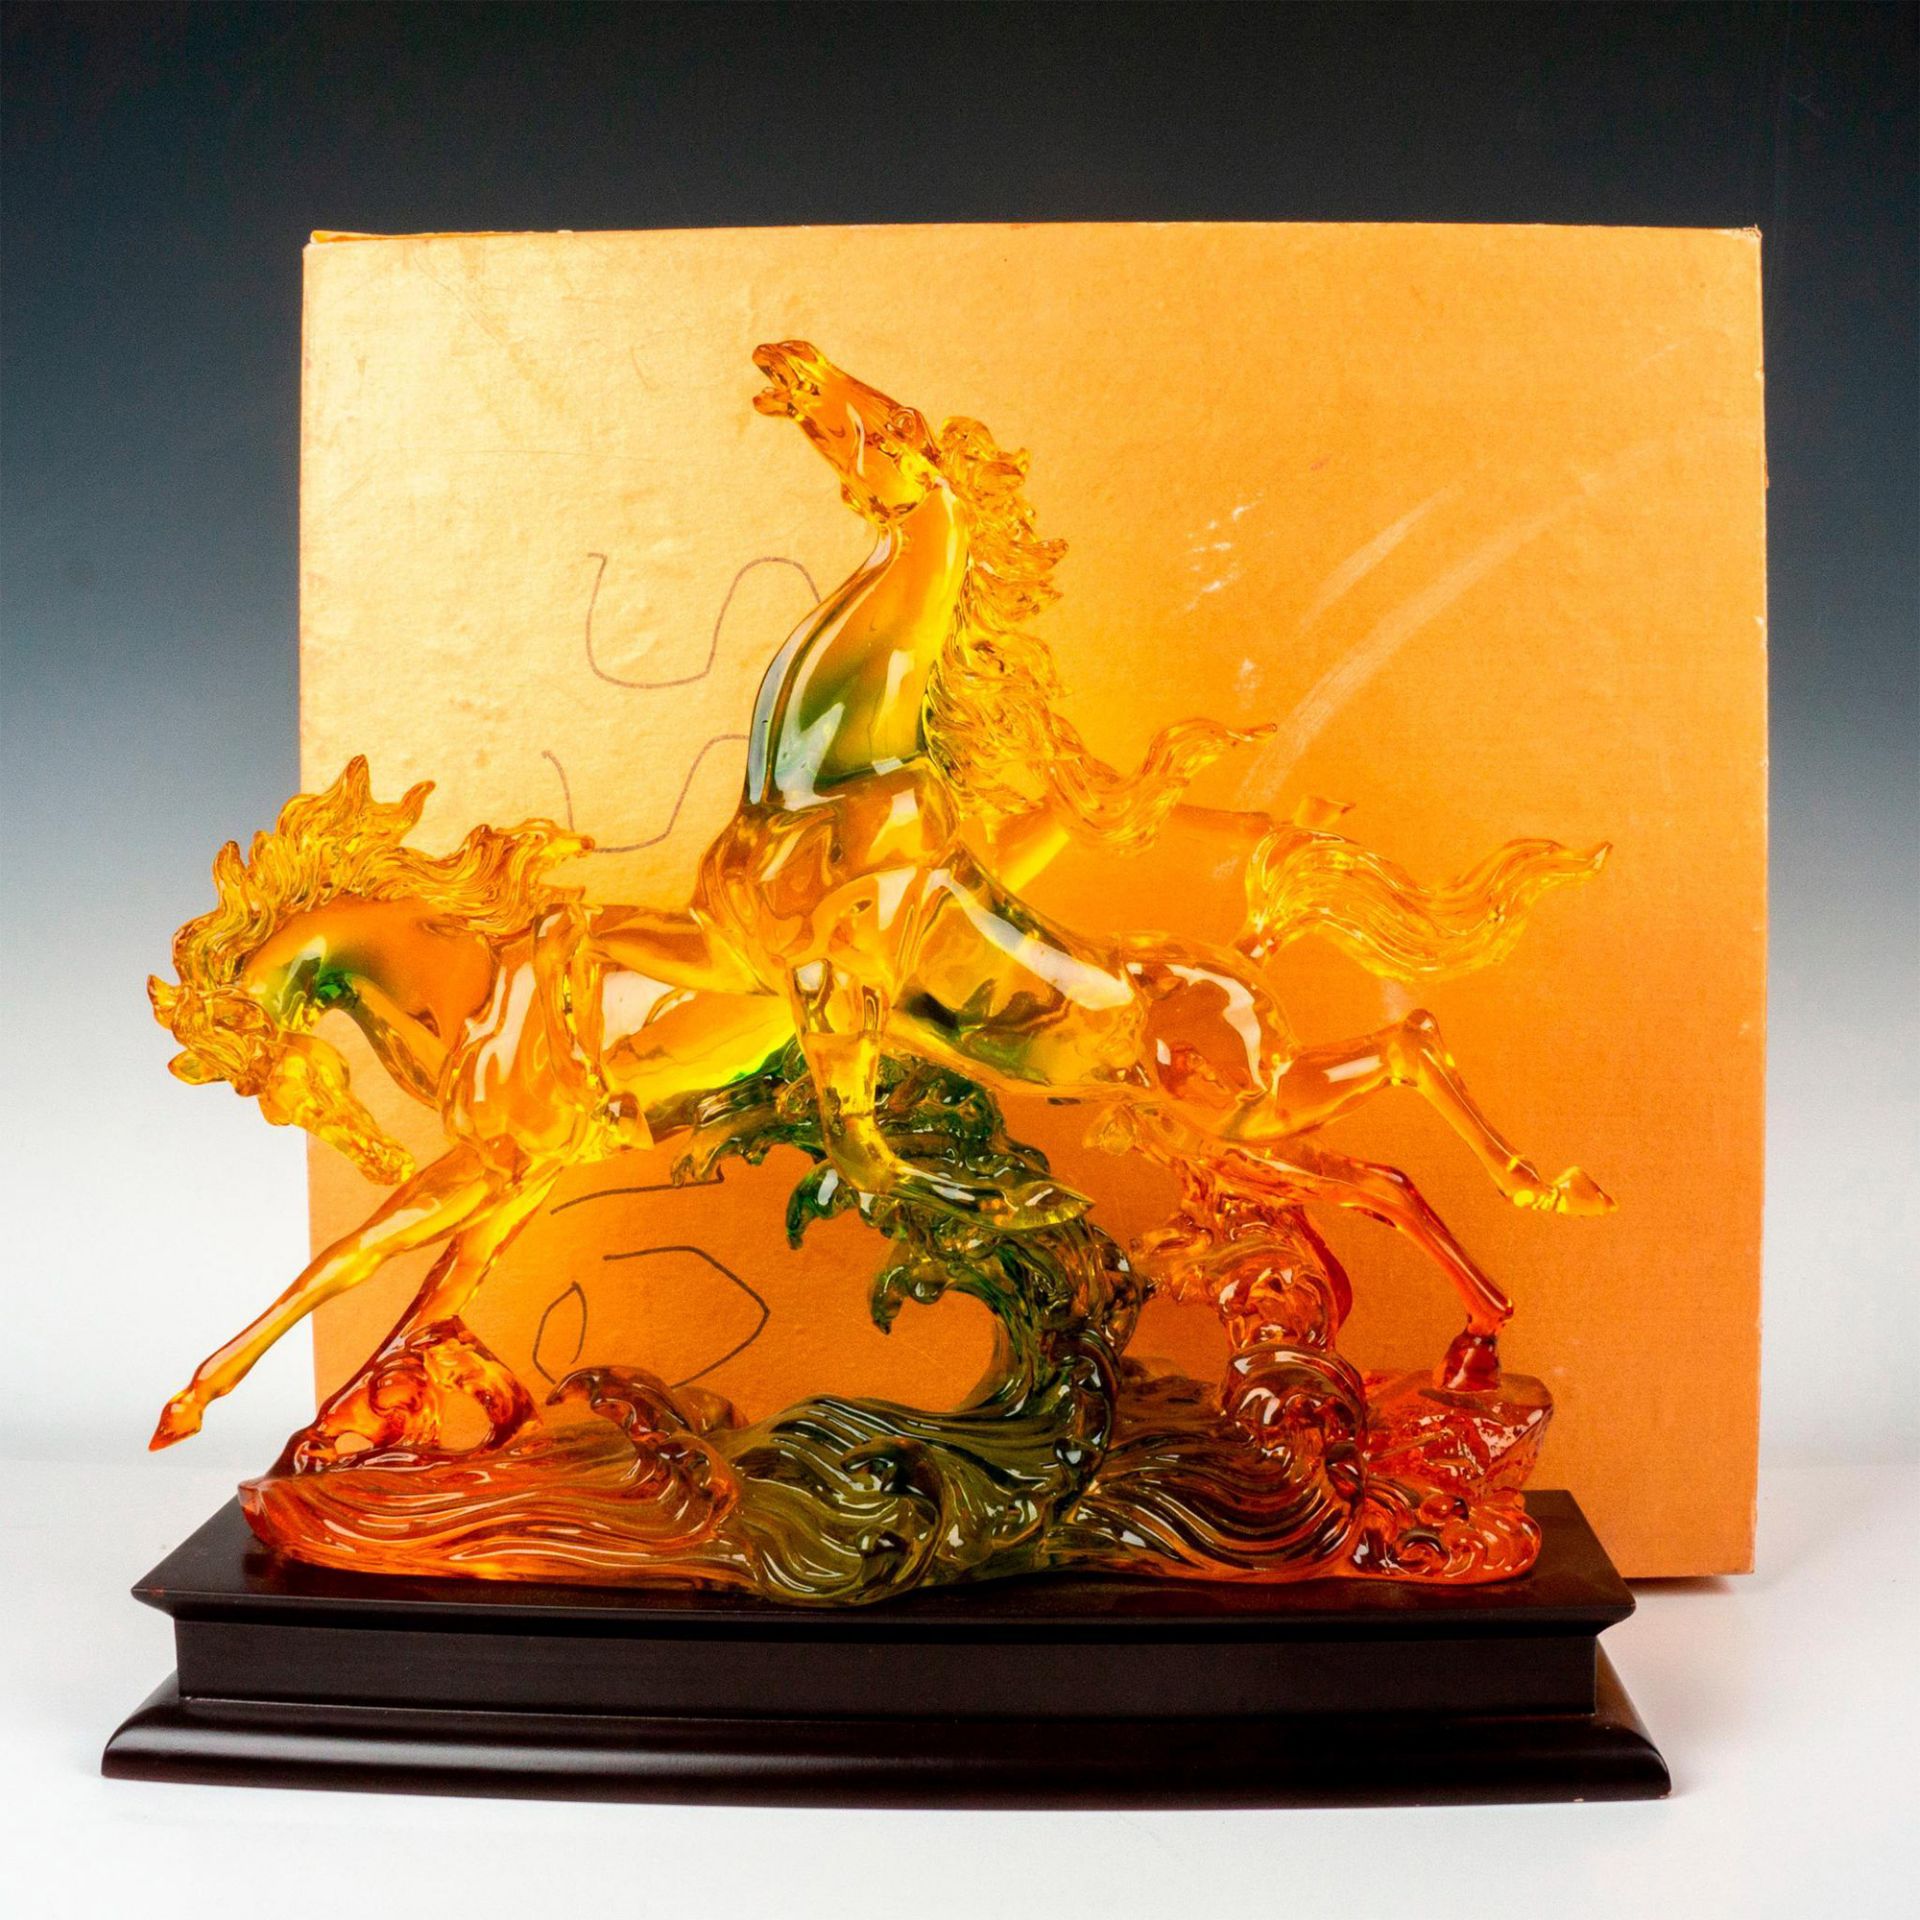 Resin Horse Feng Shui Statue on Wood Base - Image 4 of 4